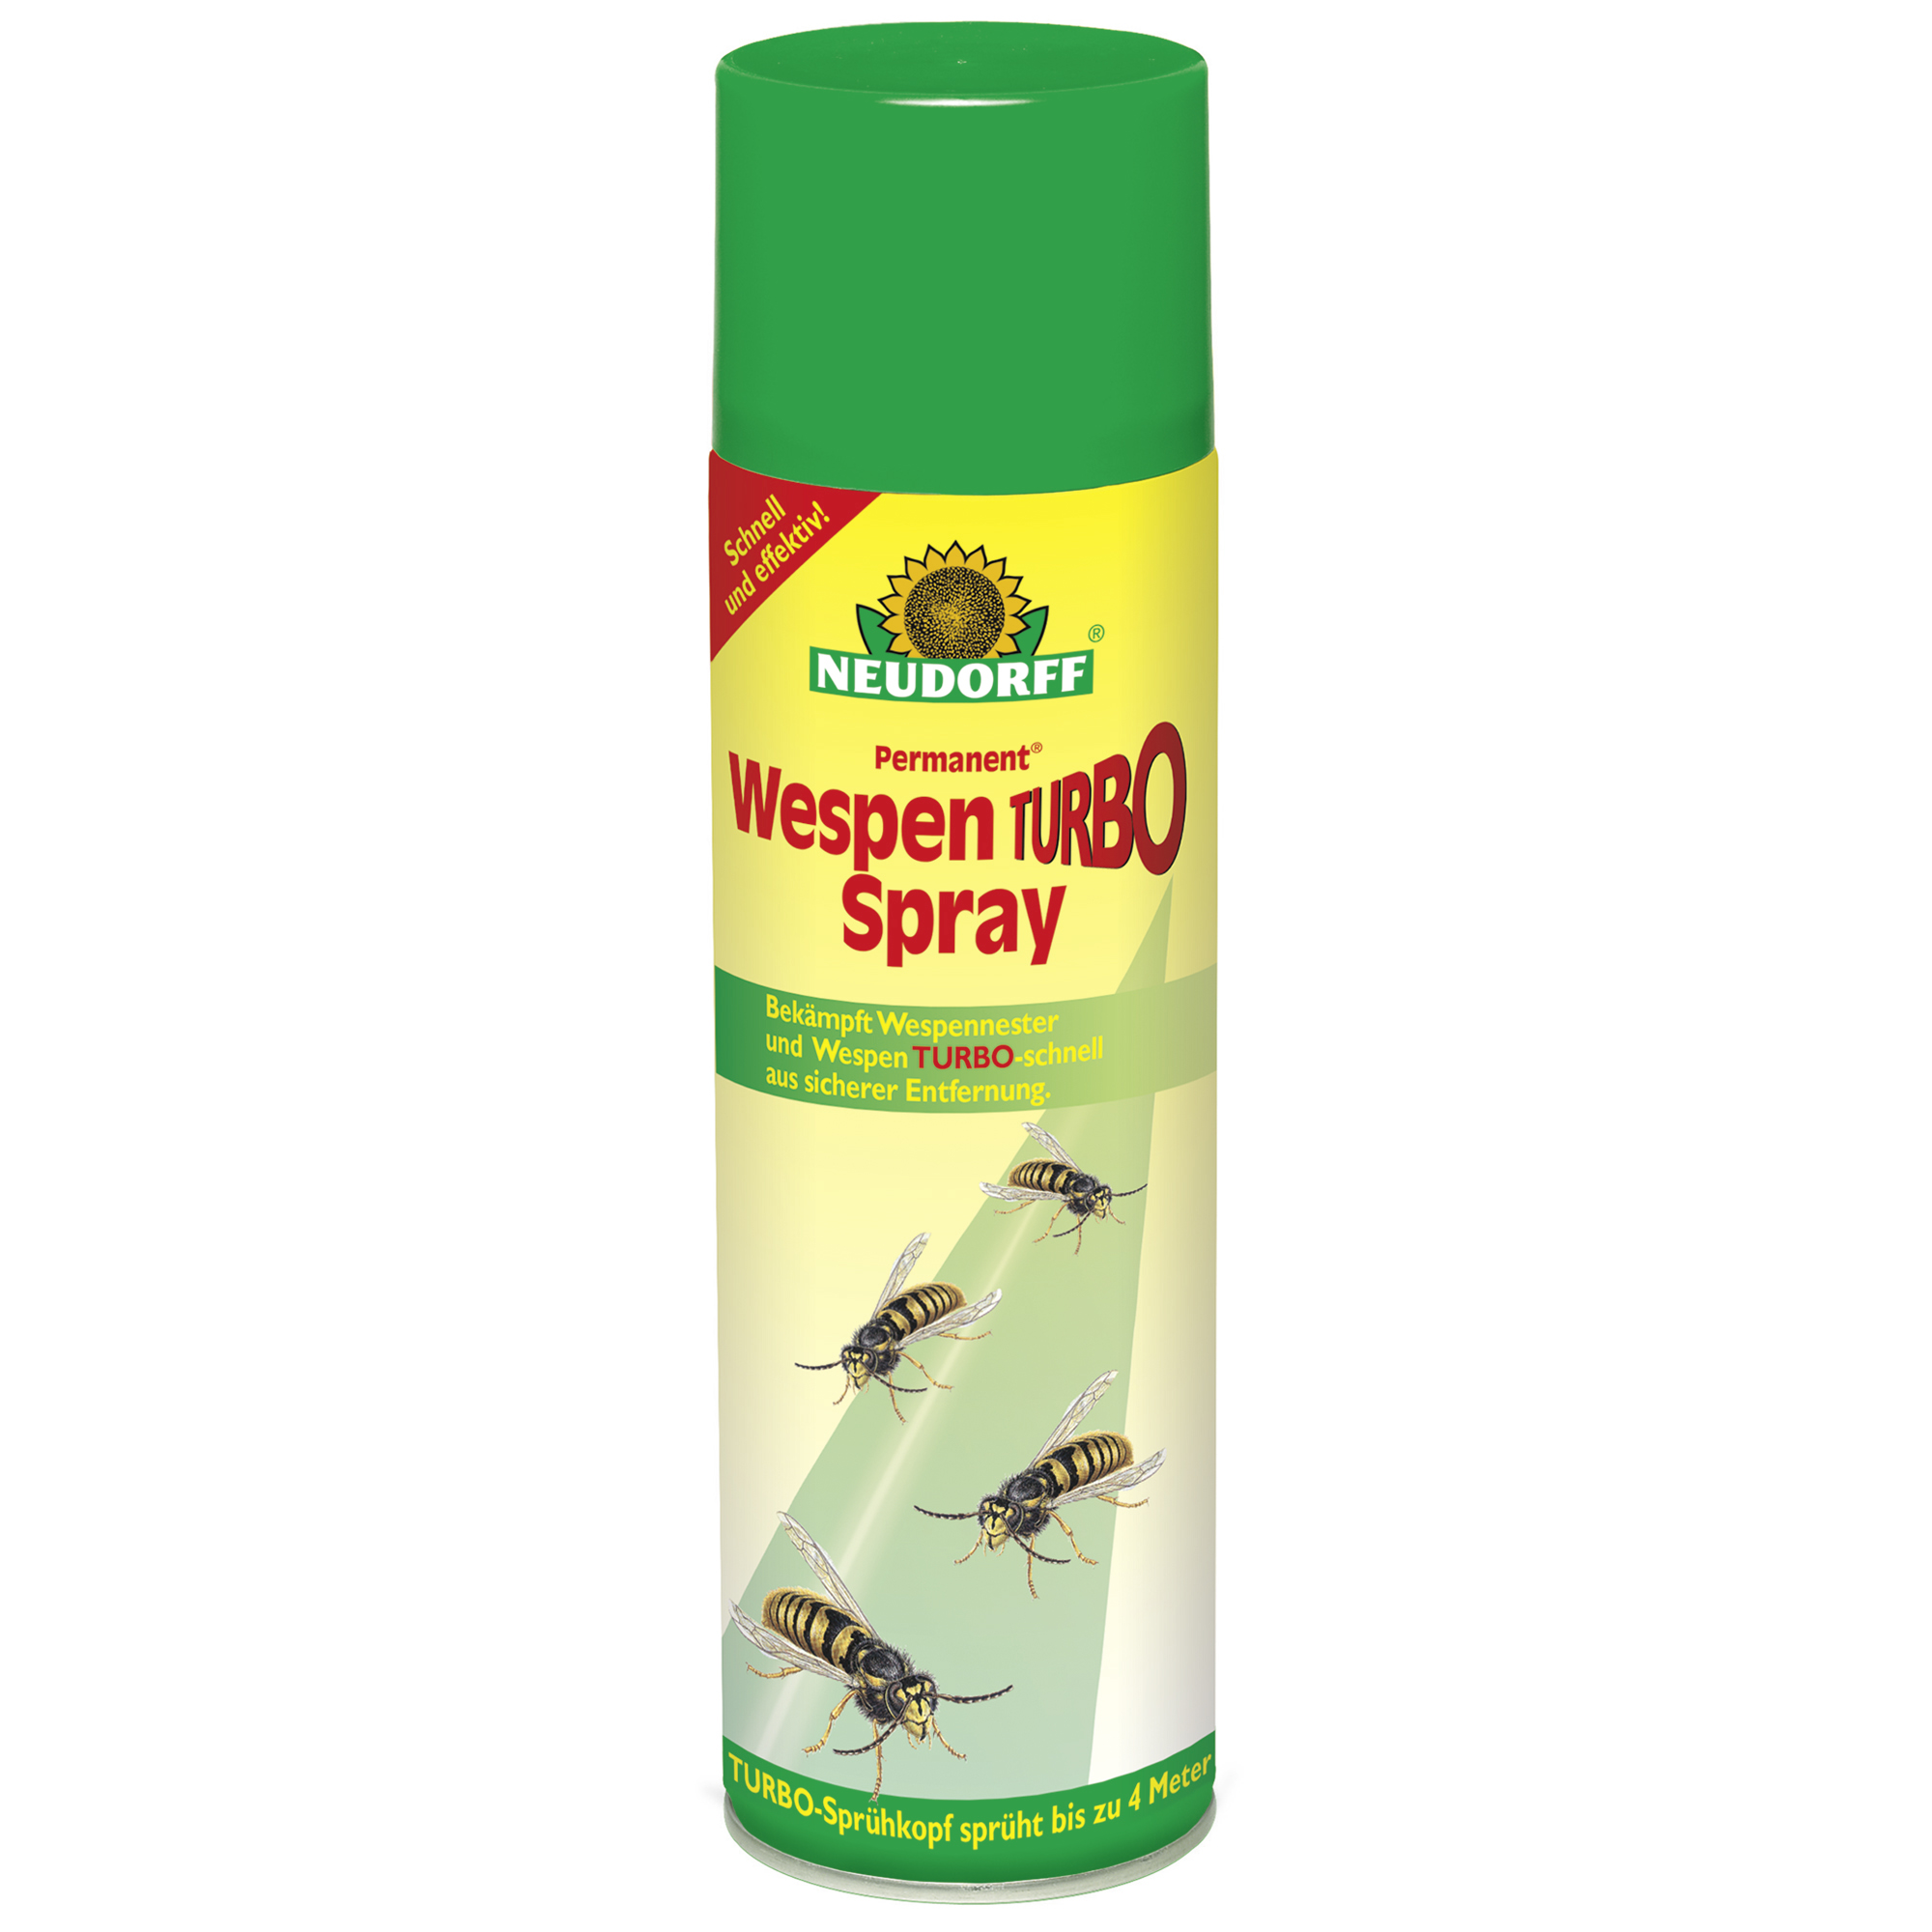 Permanent Wespen-Turbospray 500 ml + product picture